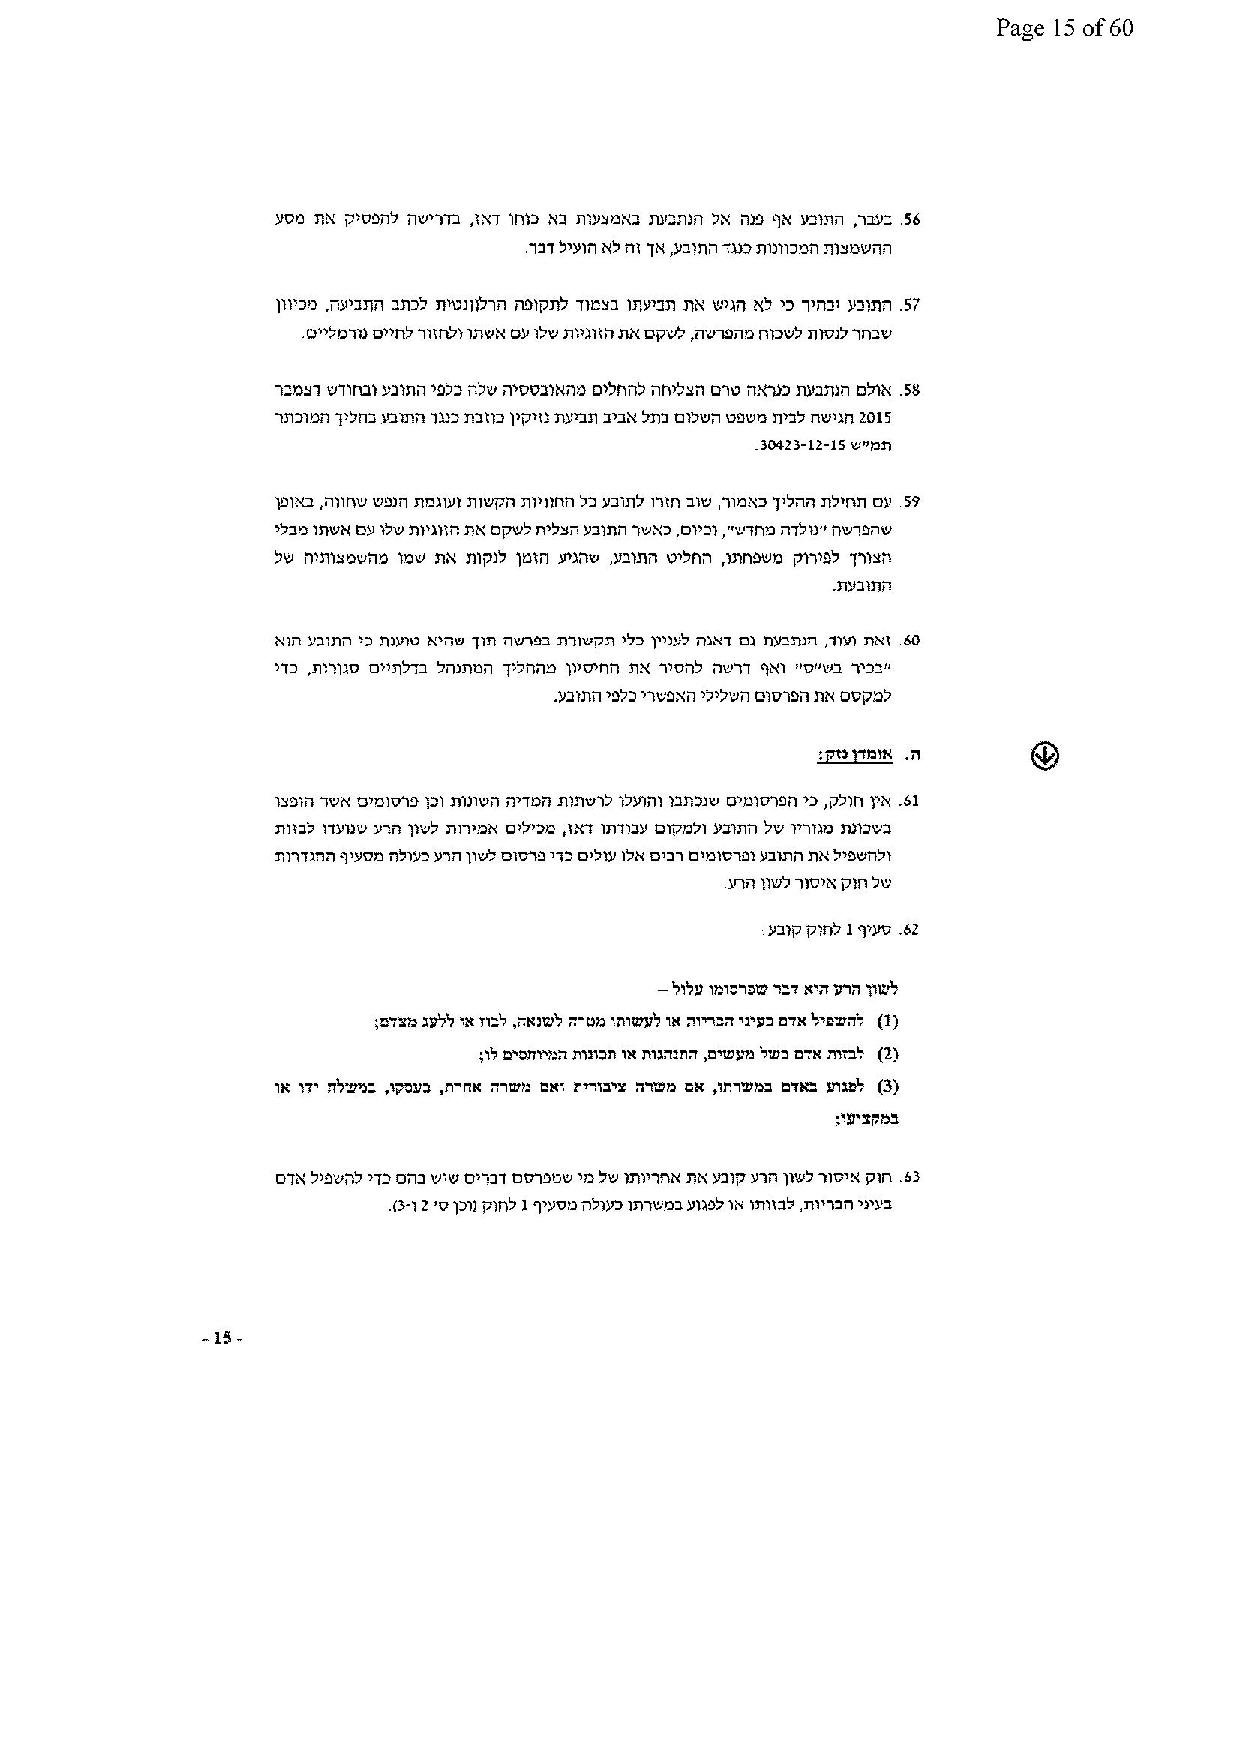 document-page-015